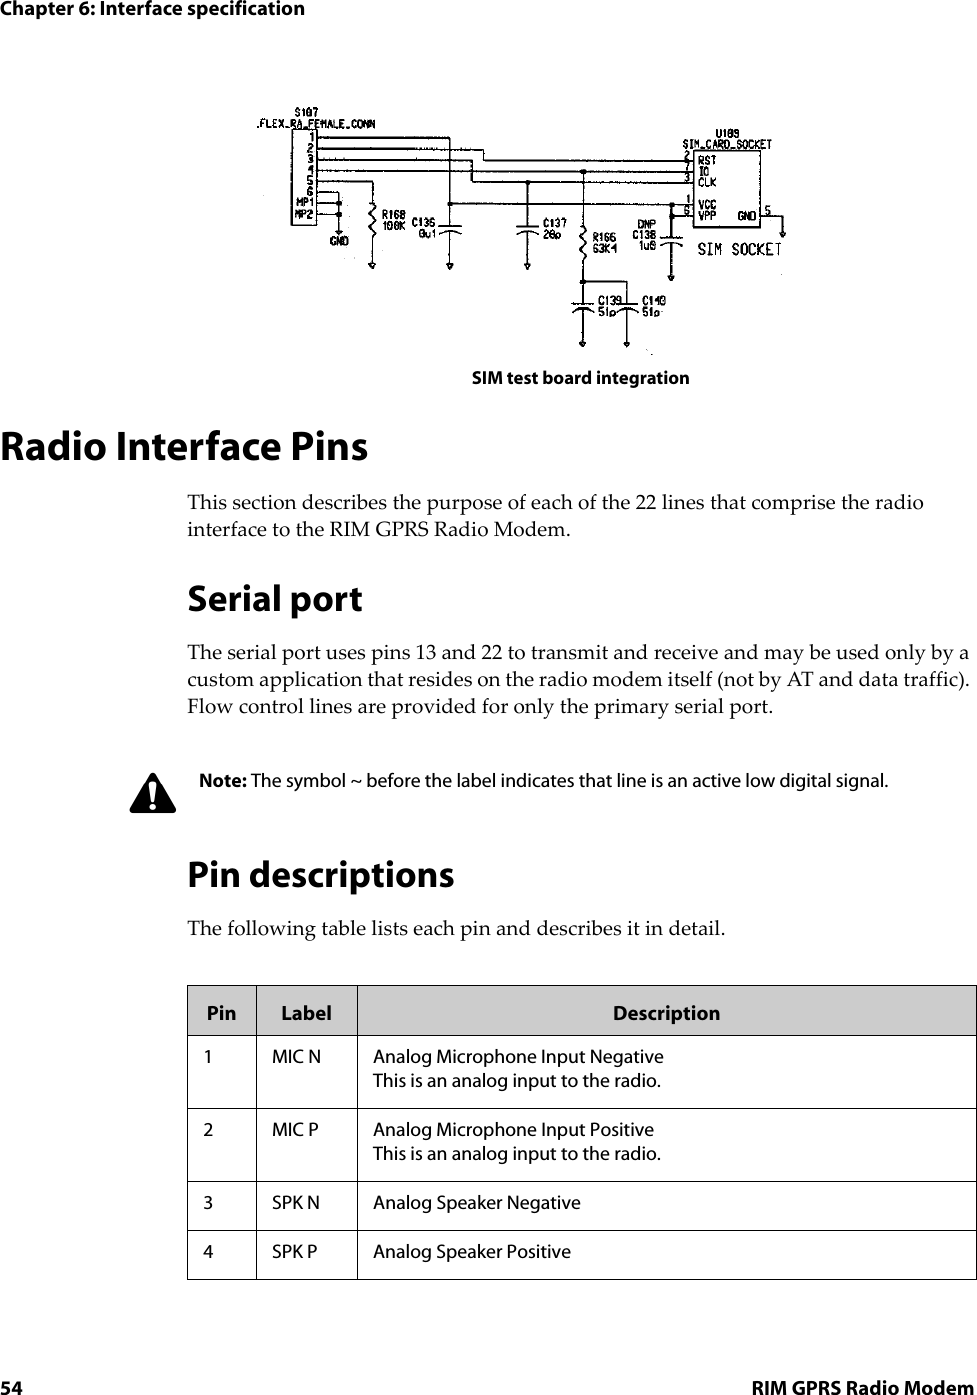 Chapter 6: Interface specification54 RIM GPRS Radio ModemSIM test board integrationRadio Interface PinsThis section describes the purpose of each of the 22 lines that comprise the radio interface to the RIM GPRS Radio Modem.Serial portThe serial port uses pins 13 and 22 to transmit and receive and may be used only by a custom application that resides on the radio modem itself (not by AT and data traffic). Flow control lines are provided for only the primary serial port.Pin descriptionsThe following table lists each pin and describes it in detail.Note: The symbol ~ before the label indicates that line is an active low digital signal.Pin Label Description1 MIC N Analog Microphone Input NegativeThis is an analog input to the radio.2 MIC P Analog Microphone Input PositiveThis is an analog input to the radio.3 SPK N Analog Speaker Negative4SPK PAnalog Speaker Positive